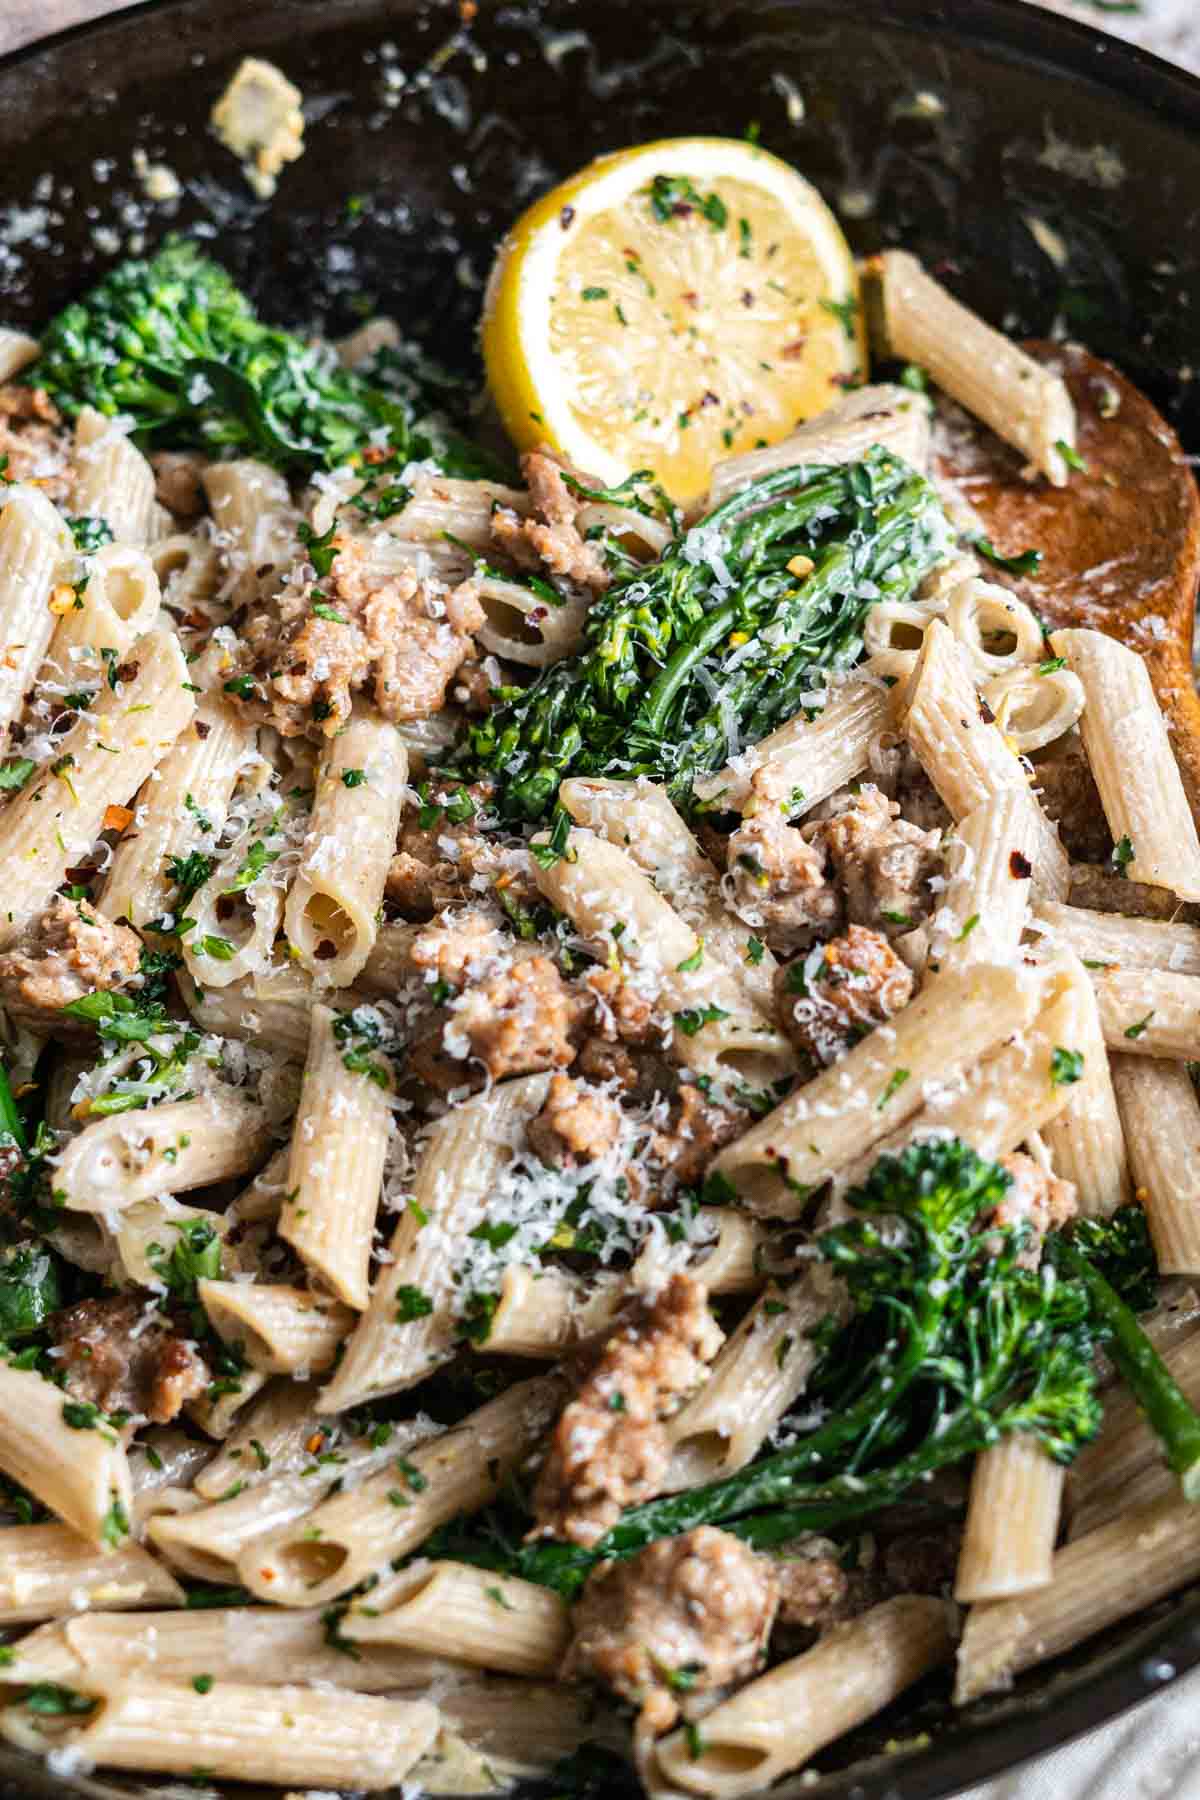 Penne pasta with broccolini, sausage, and parmesan cheese in a skillet.